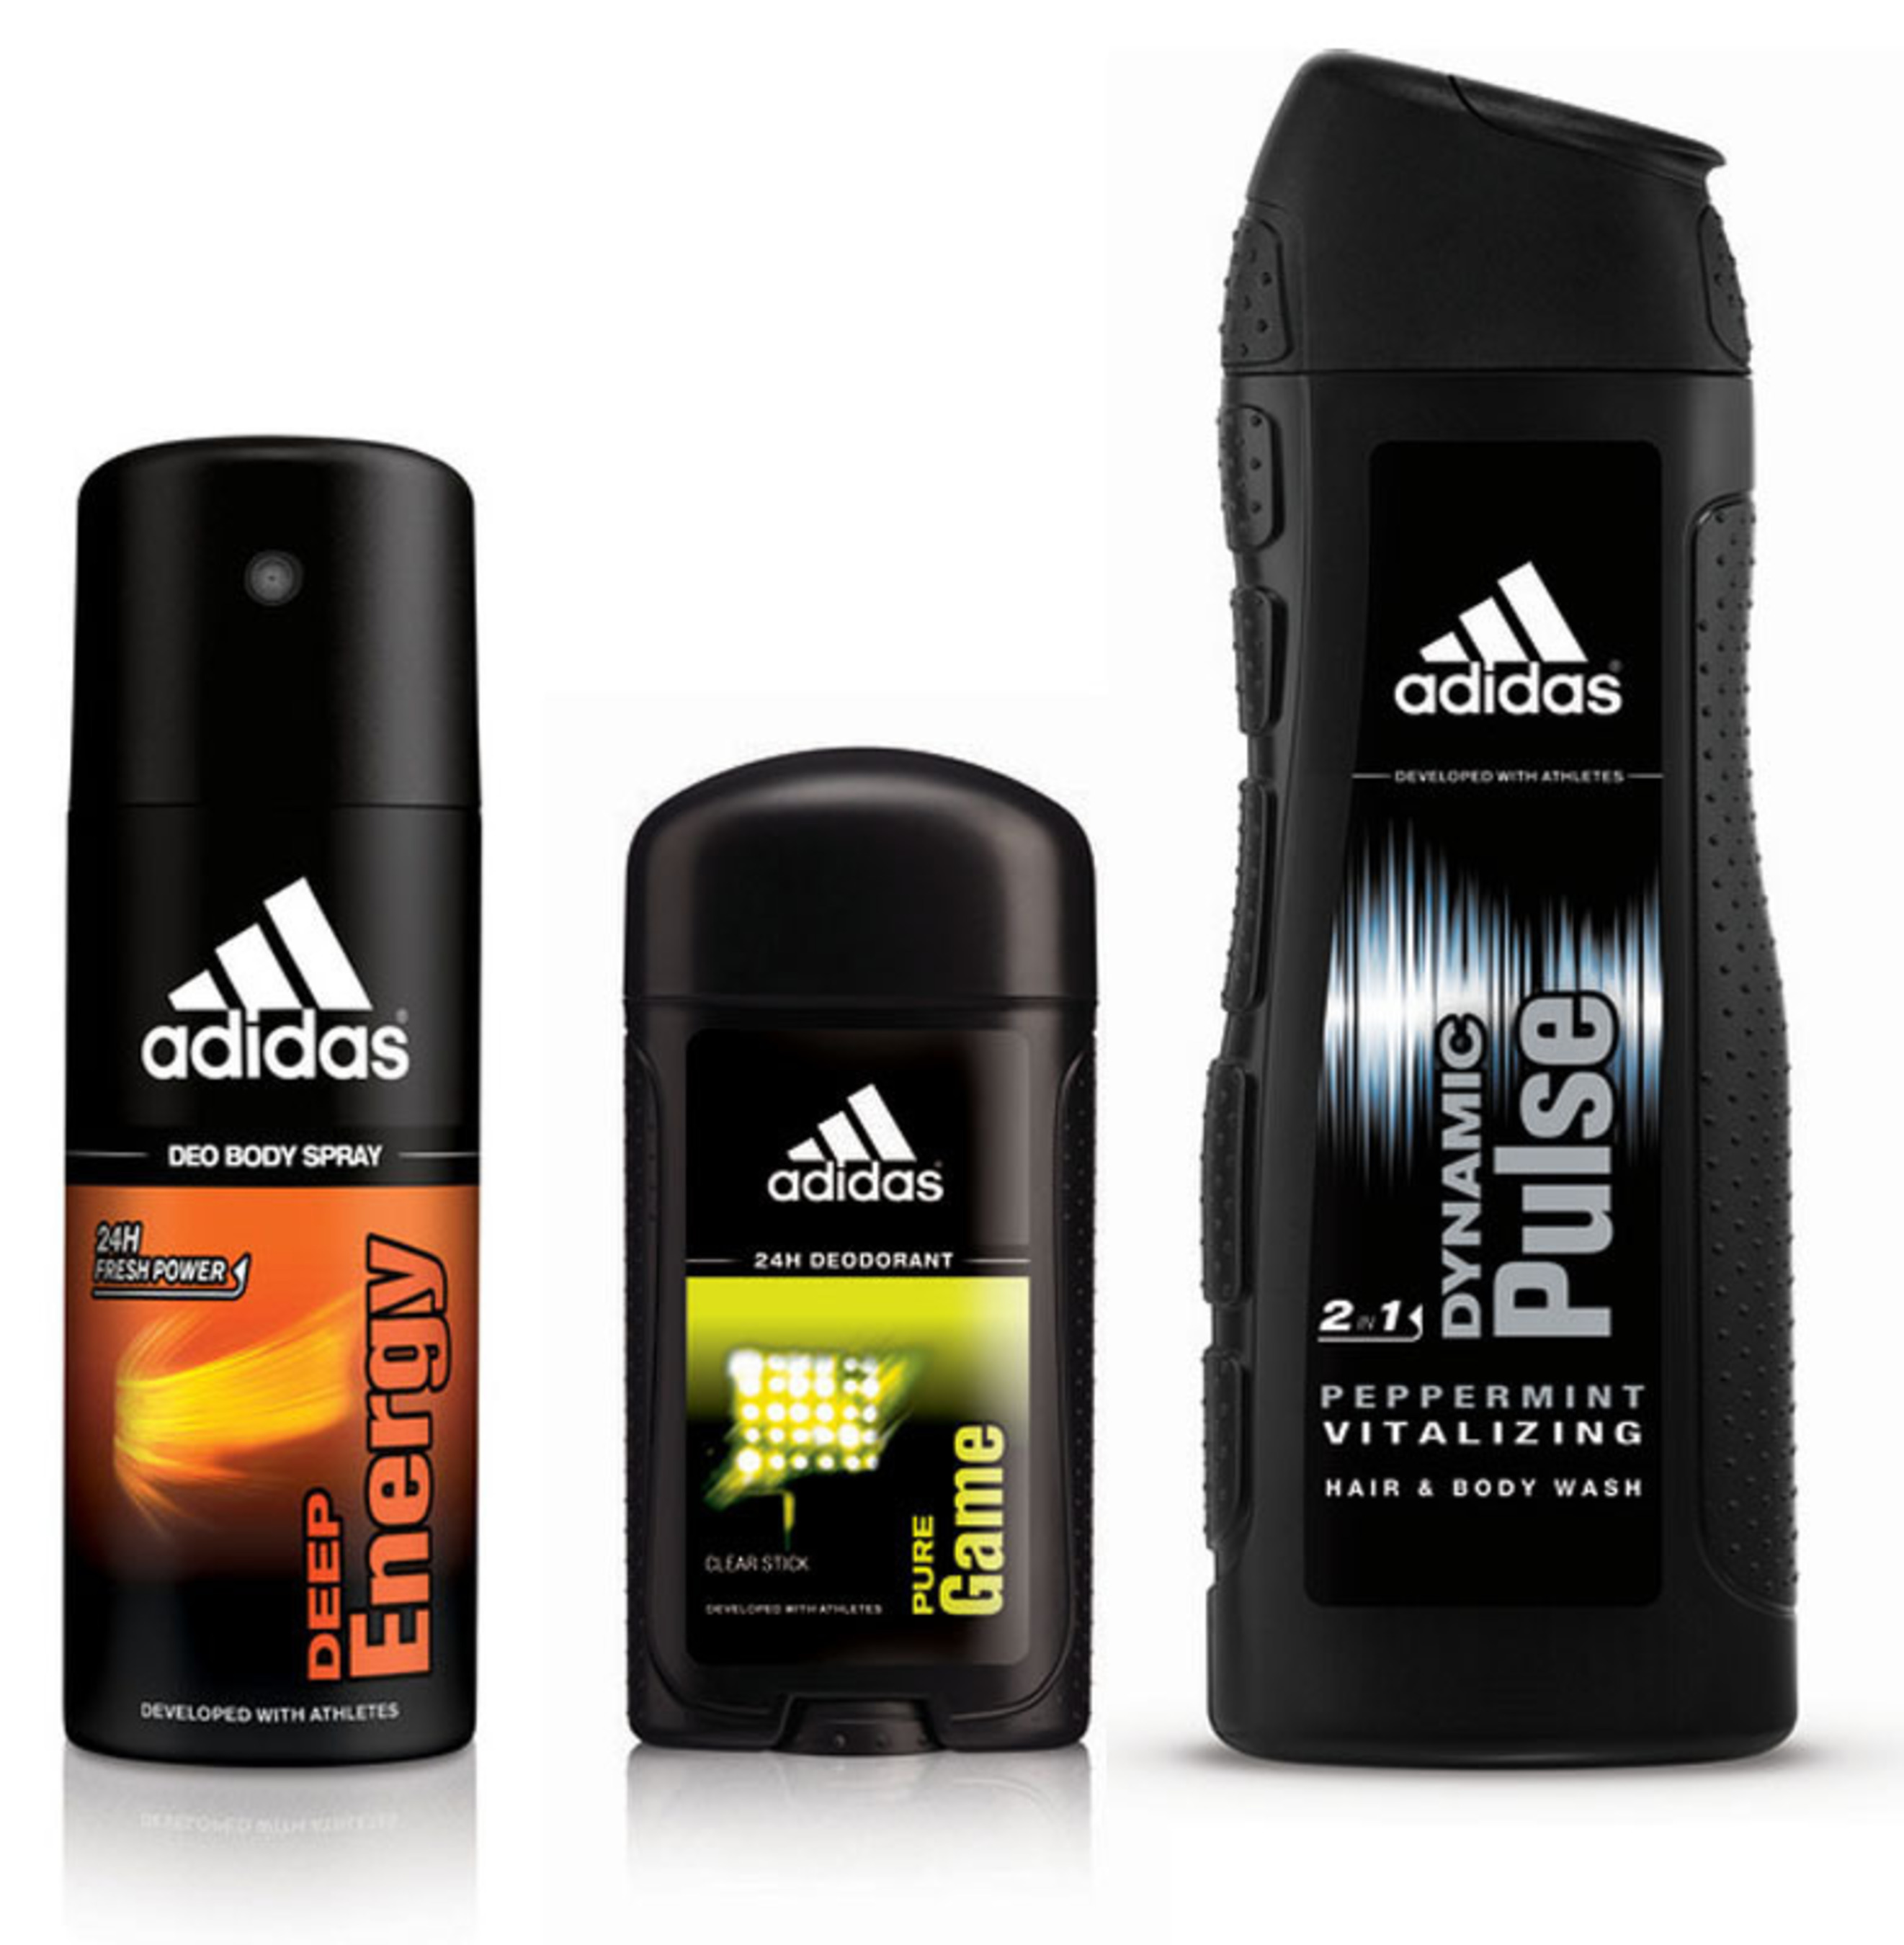 famélico freír Curiosidad Gear Up For A New School Year With adidas Personal Care